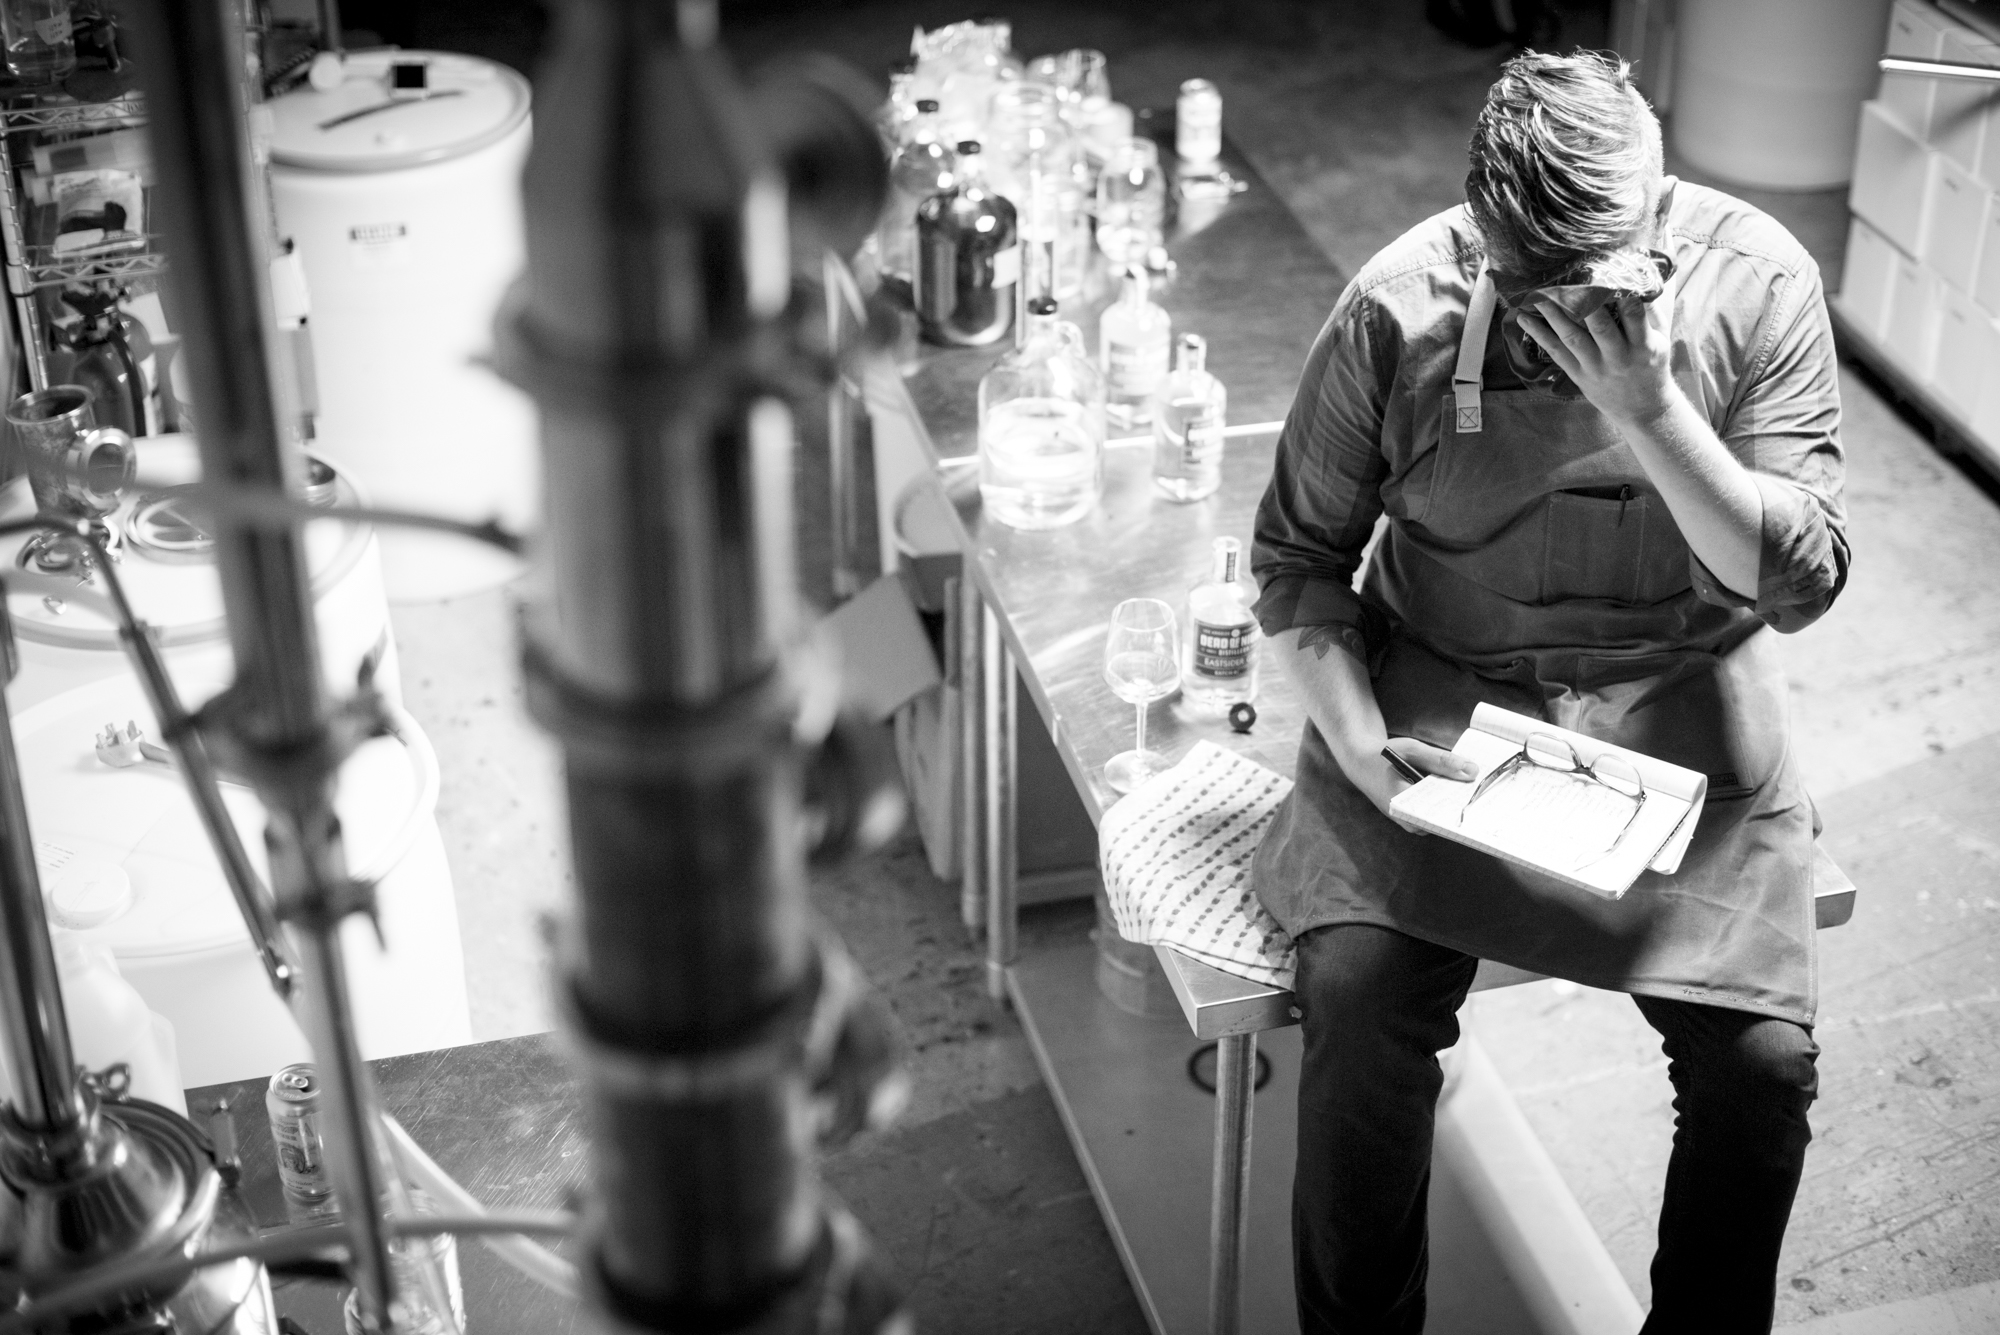  Photograph of a distiller making craft spirits in Los Angeles, California  